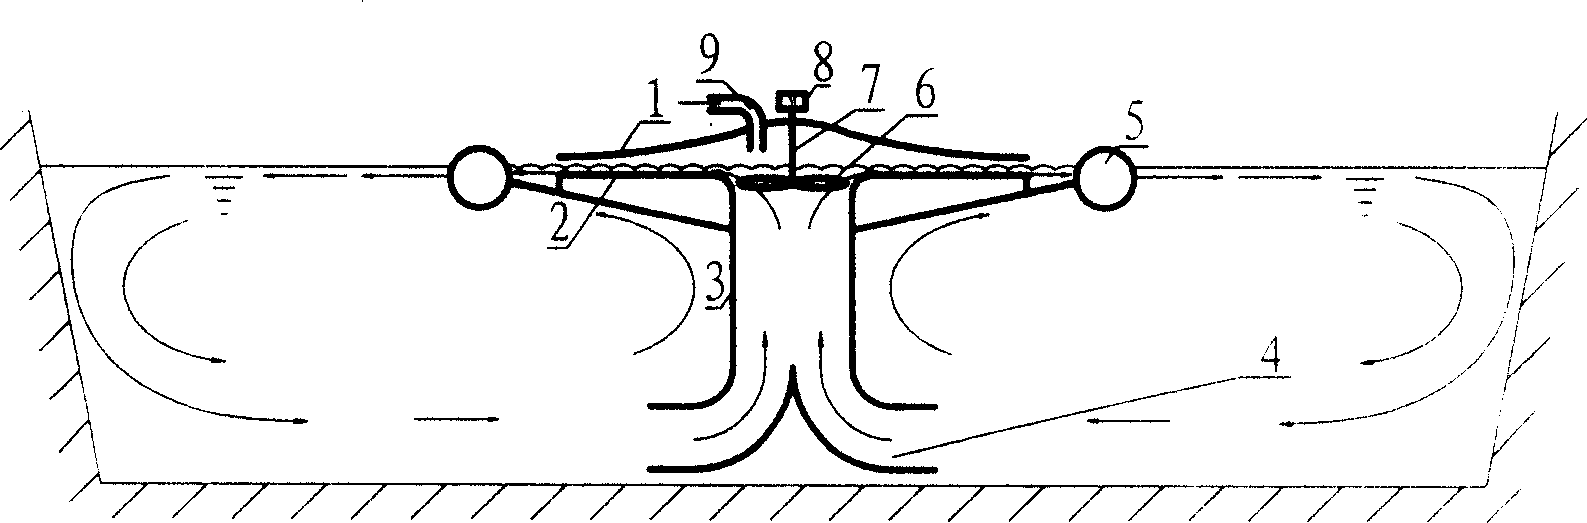 Energy-saving water sterilization device for subcritical flow